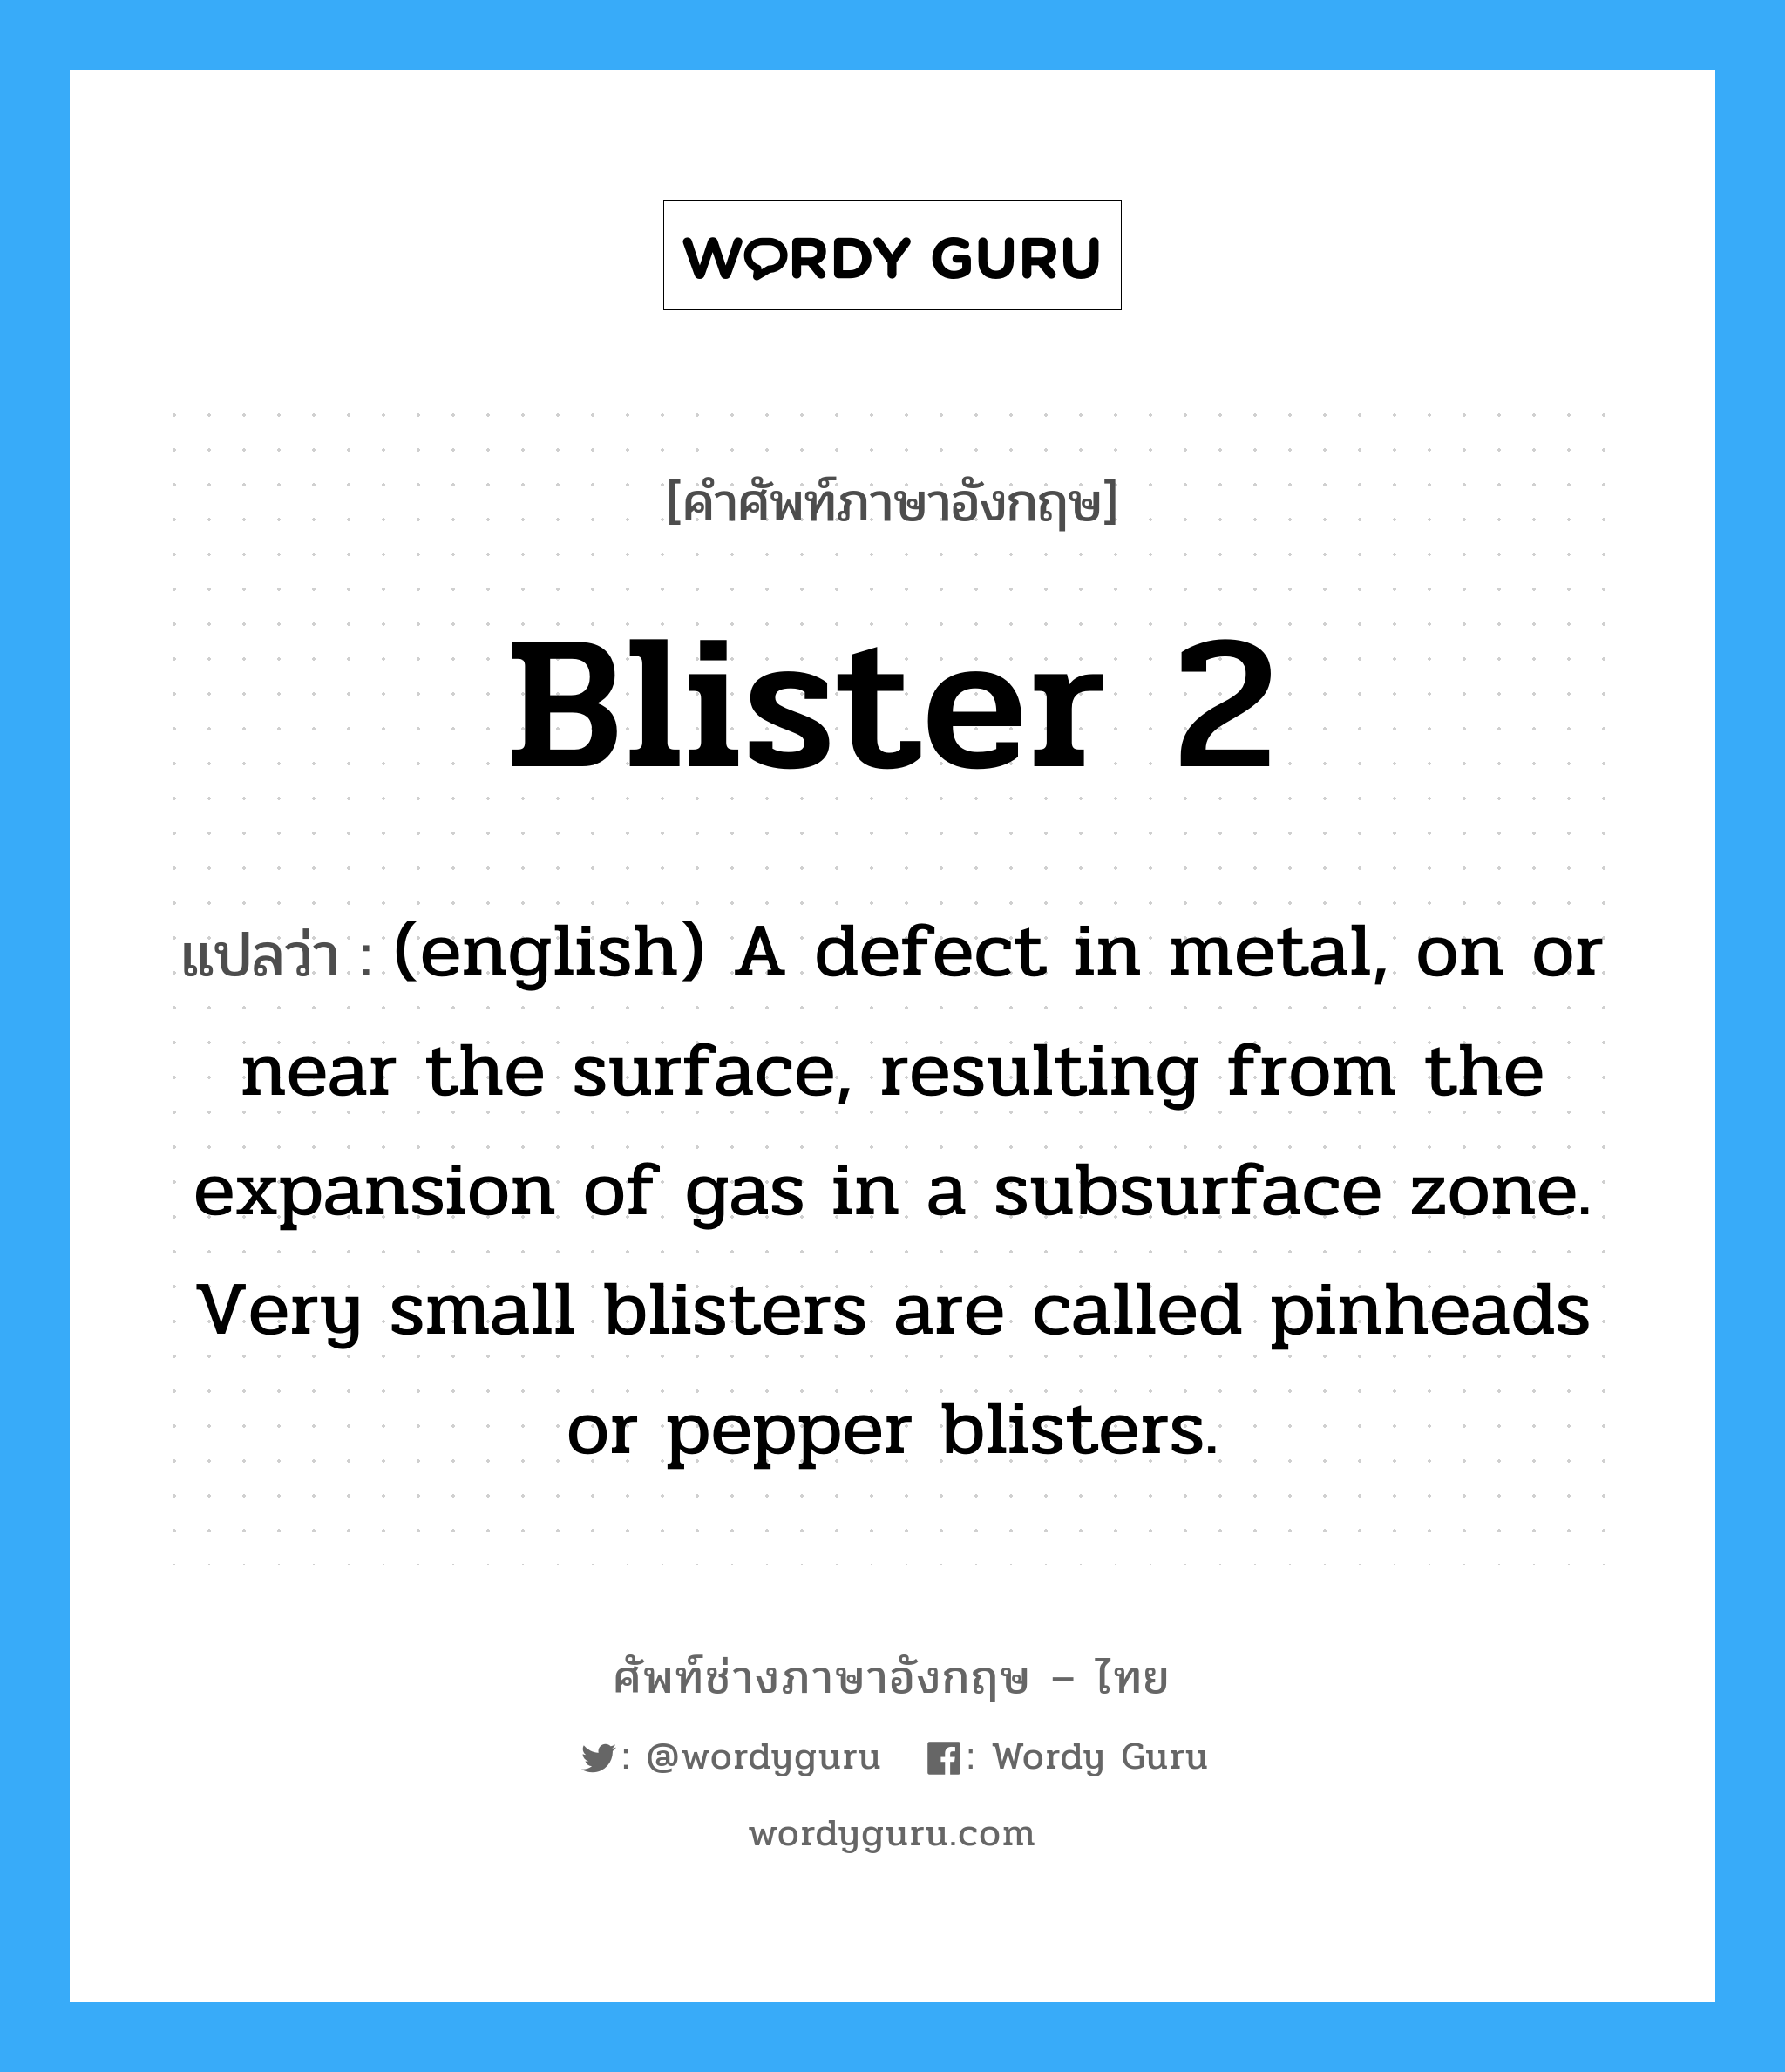 Blister 2 แปลว่า?, คำศัพท์ช่างภาษาอังกฤษ - ไทย Blister 2 คำศัพท์ภาษาอังกฤษ Blister 2 แปลว่า (english) A defect in metal, on or near the surface, resulting from the expansion of gas in a subsurface zone. Very small blisters are called pinheads or pepper blisters.